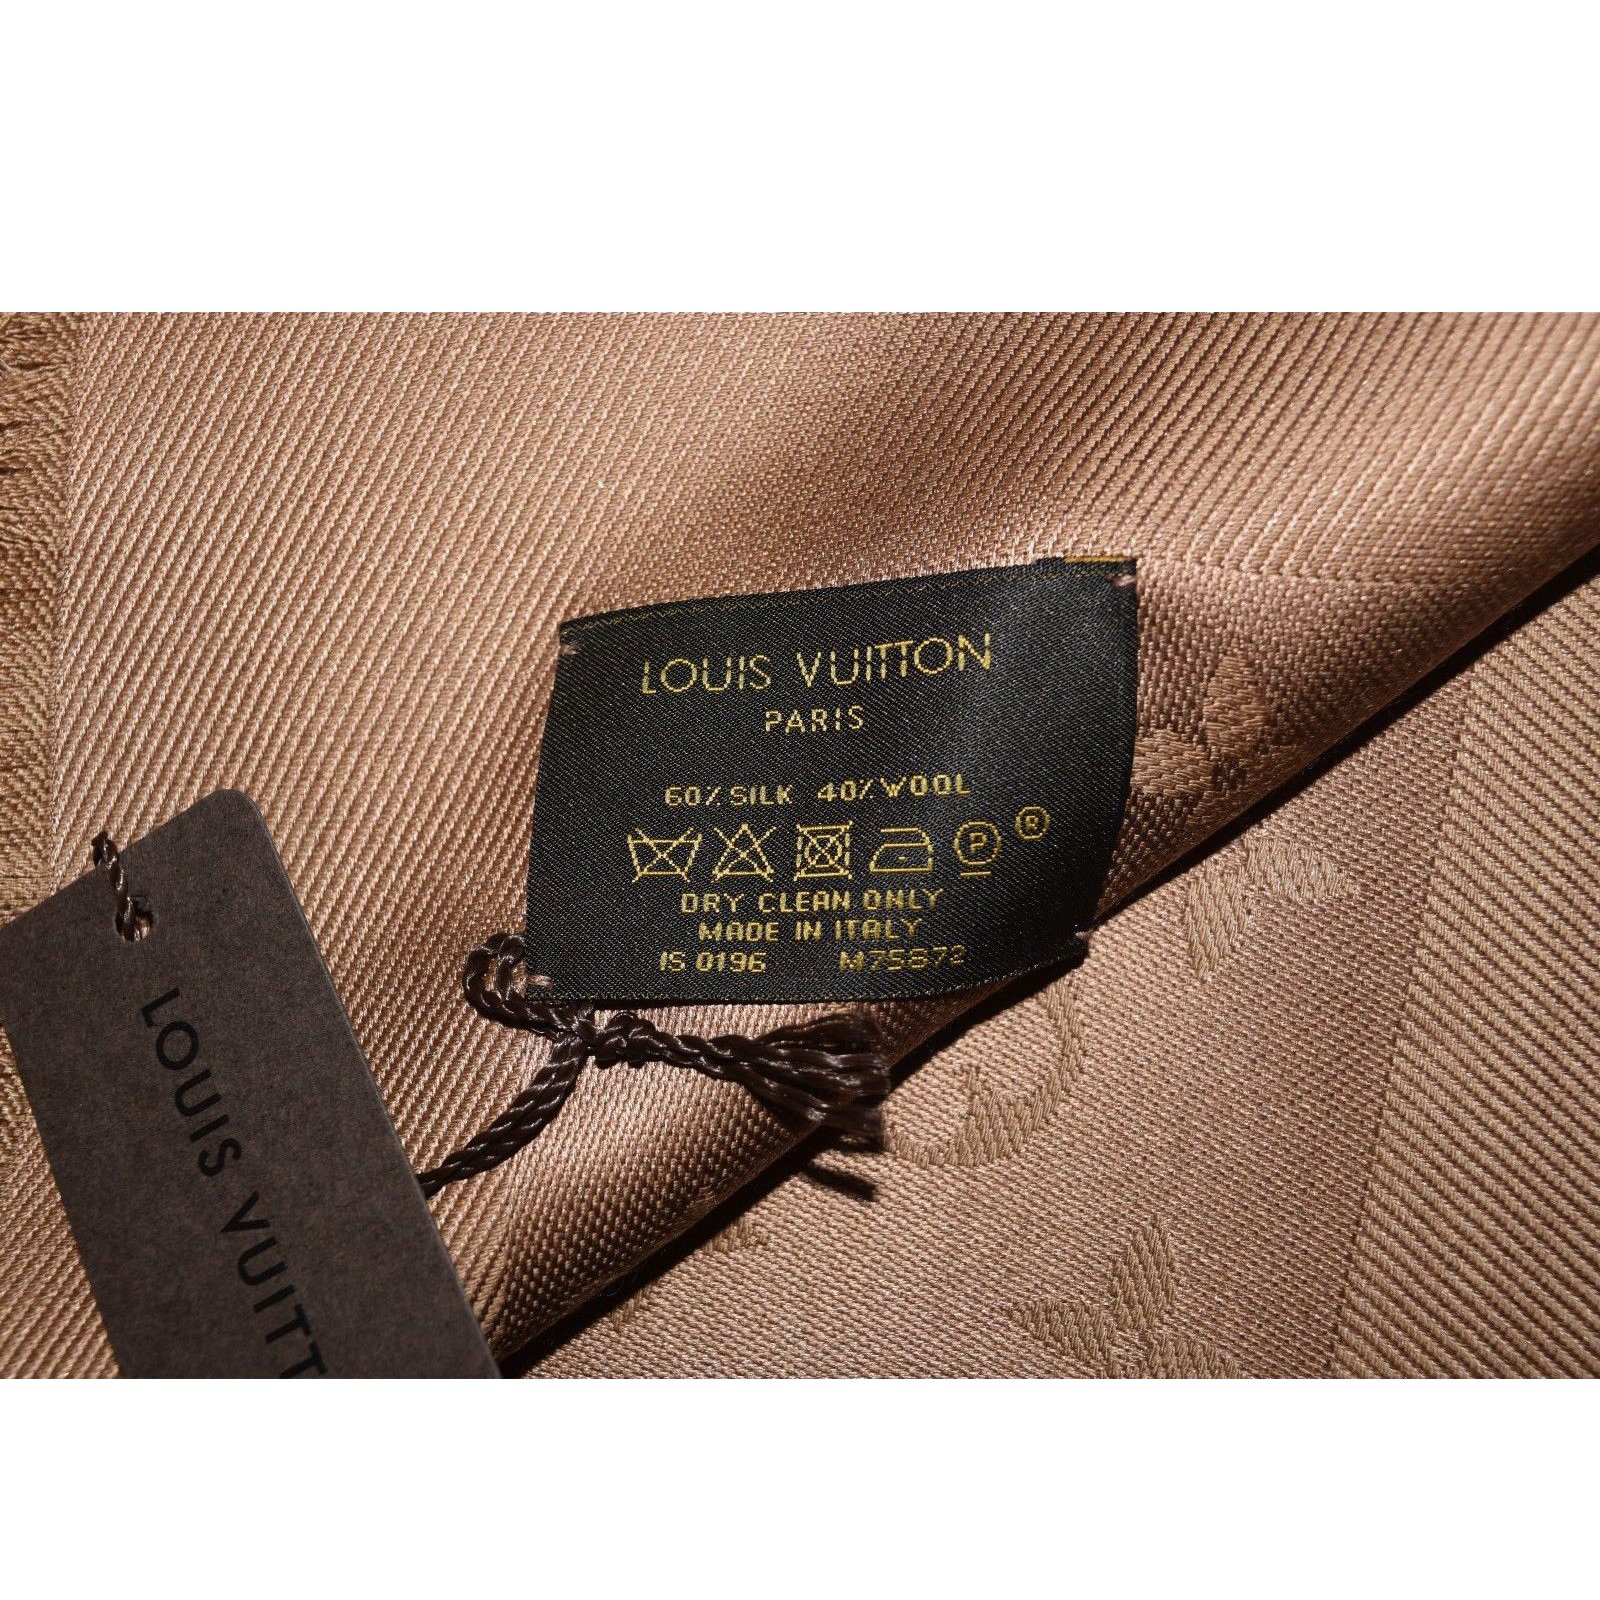 Louis Vuitton nude color monogram scarf made of 60% silk and 40